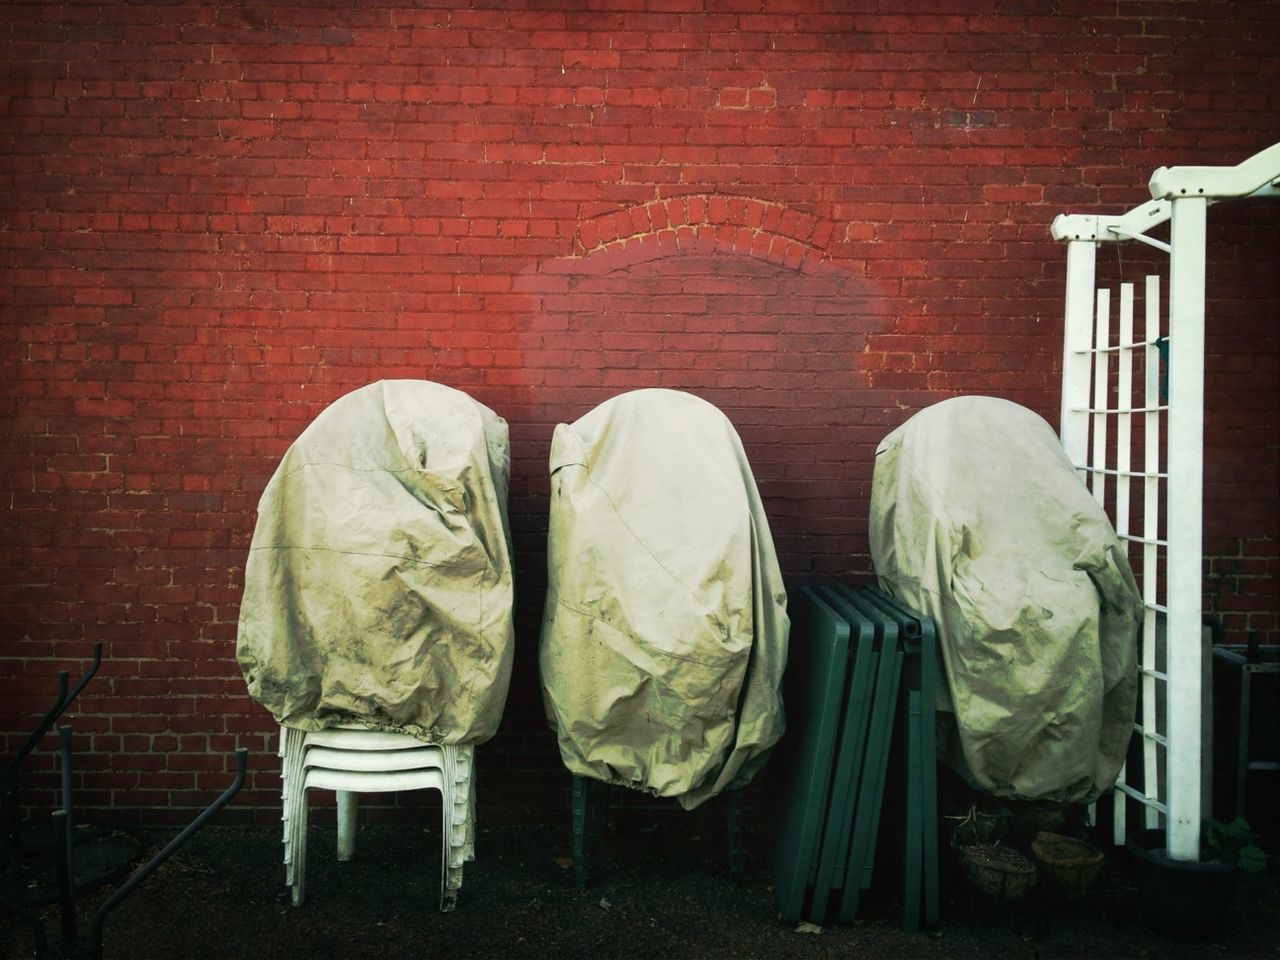 Chairs covered with cloth against brick wall